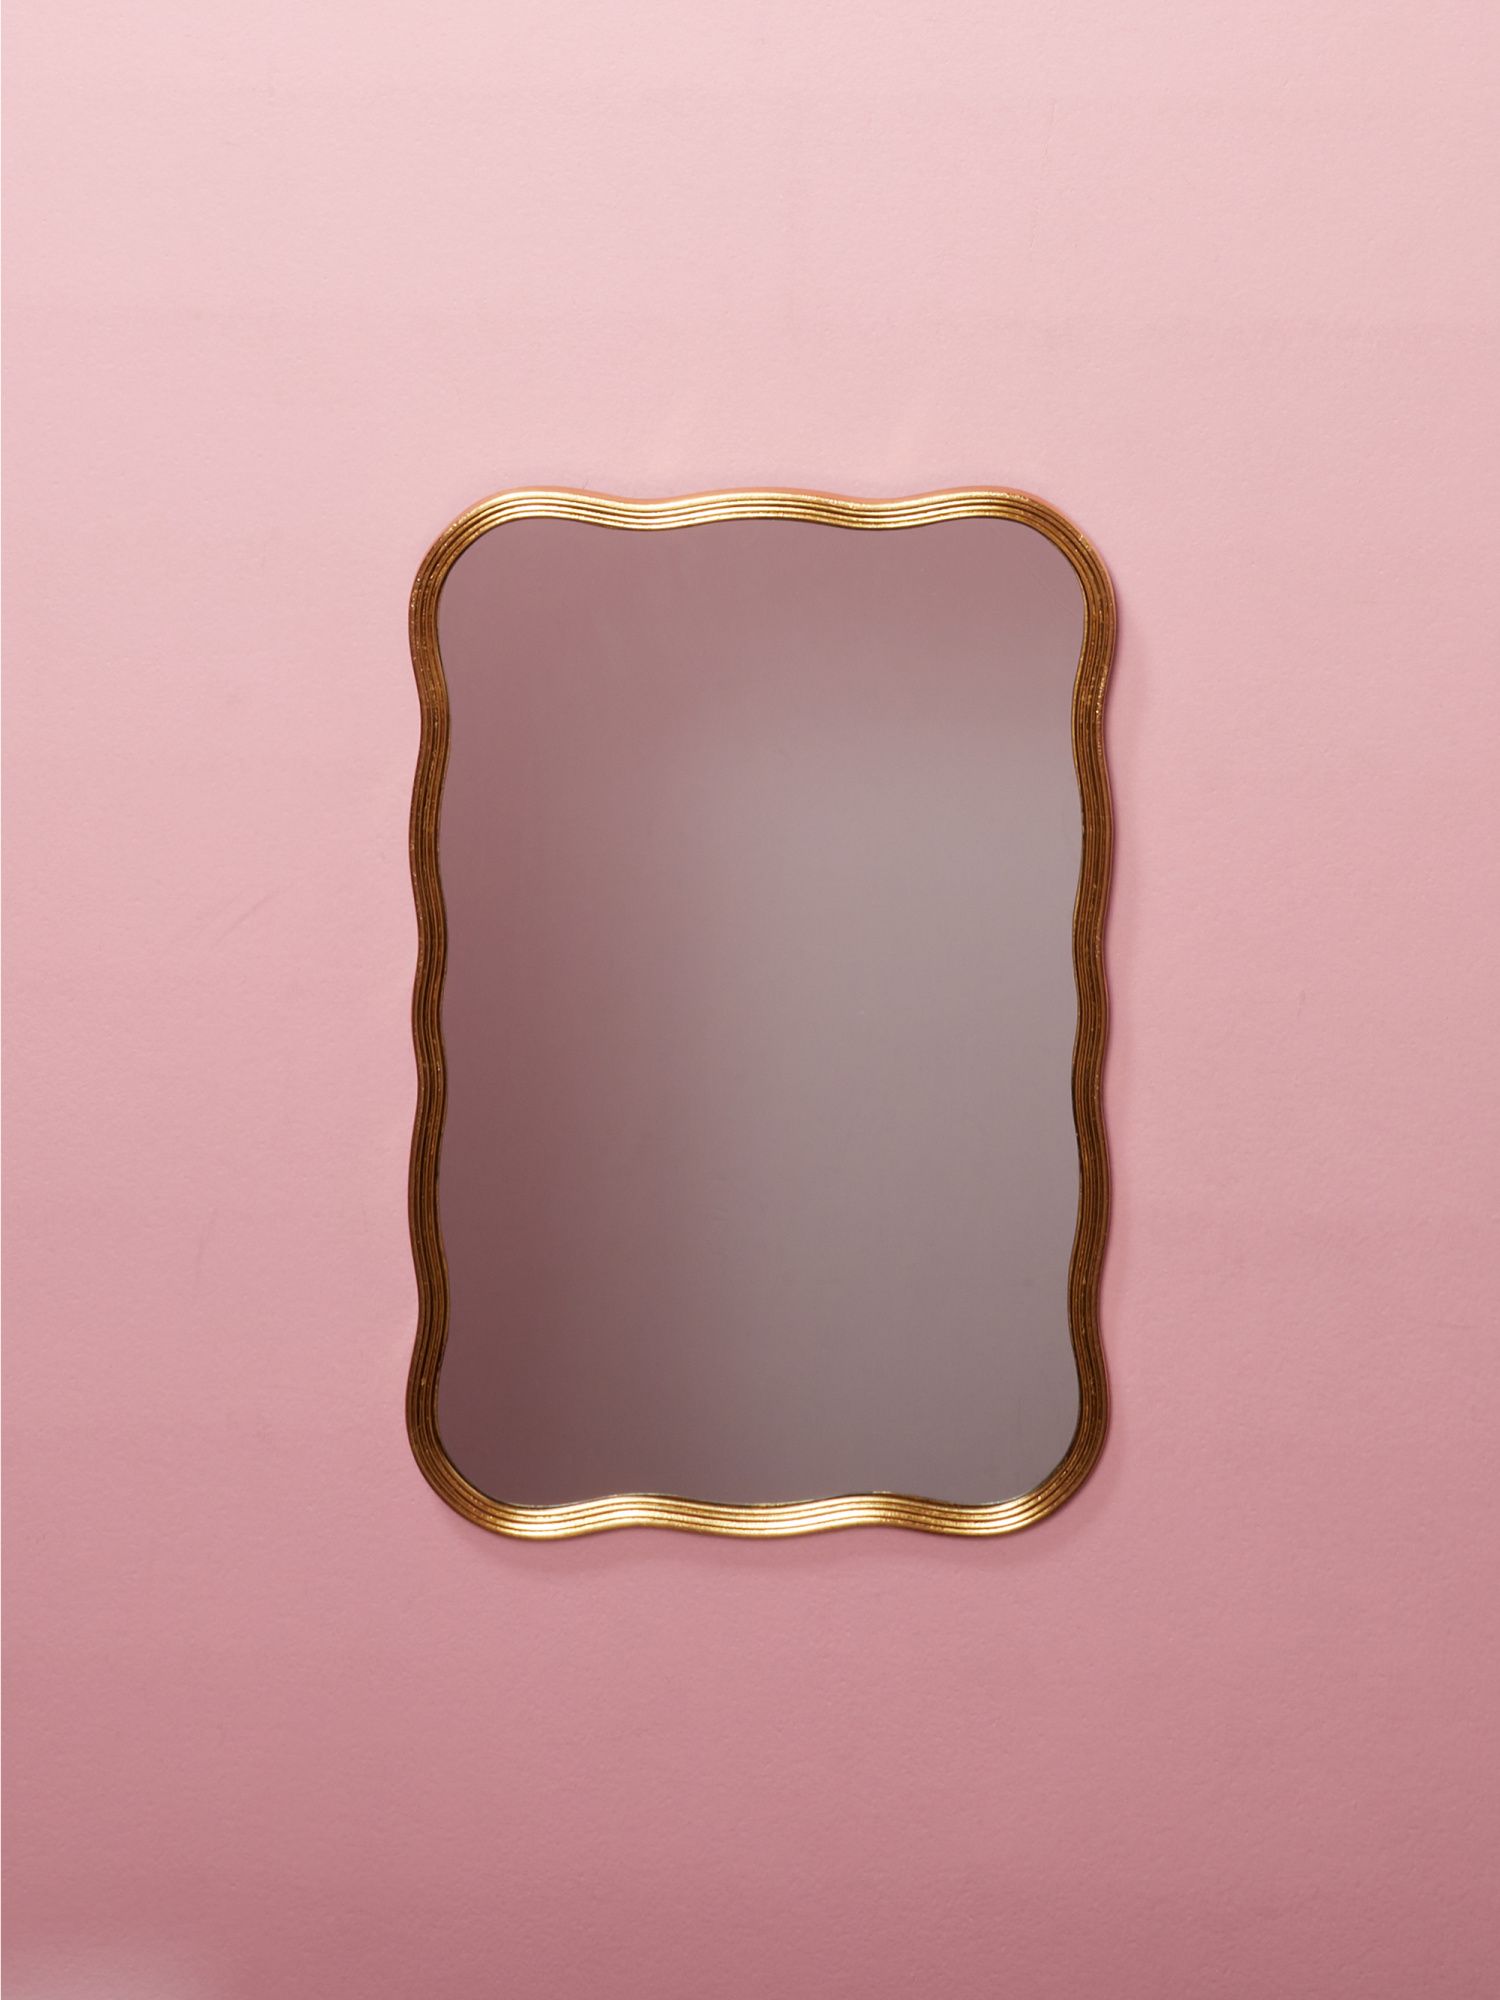 24x36 Squiggle Frame Wall Mirror | HomeGoods